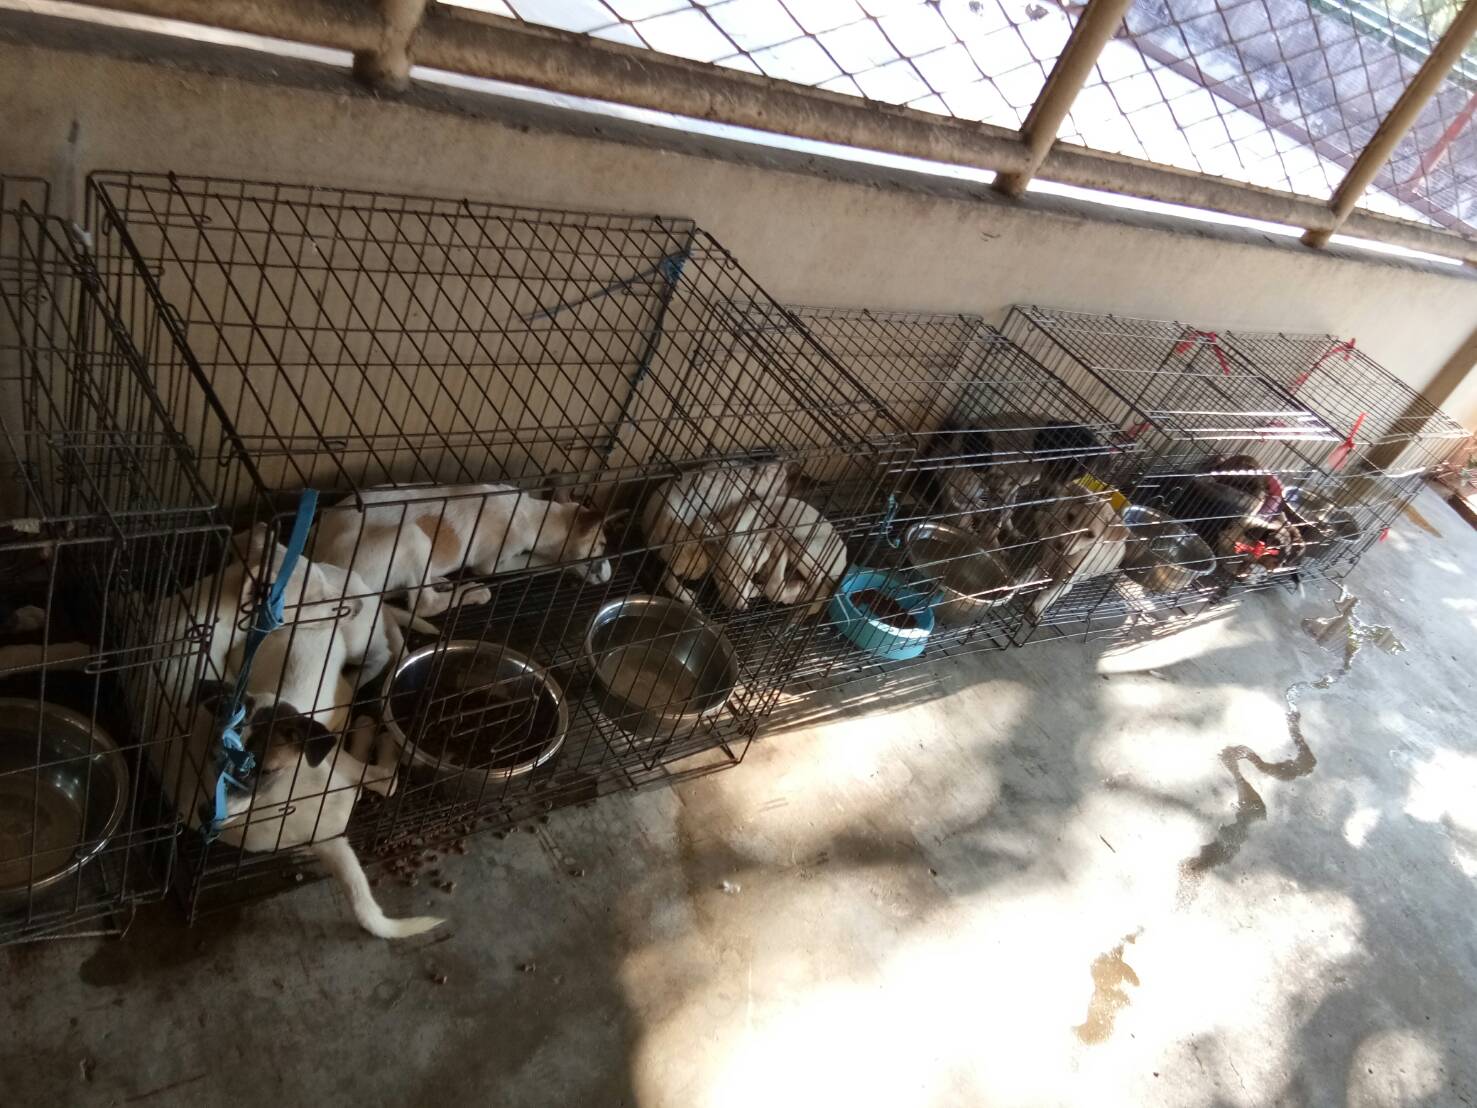 Dogs lie in cages at the Prawet shelter. Photo: Watchdog Thailand / Courtesy